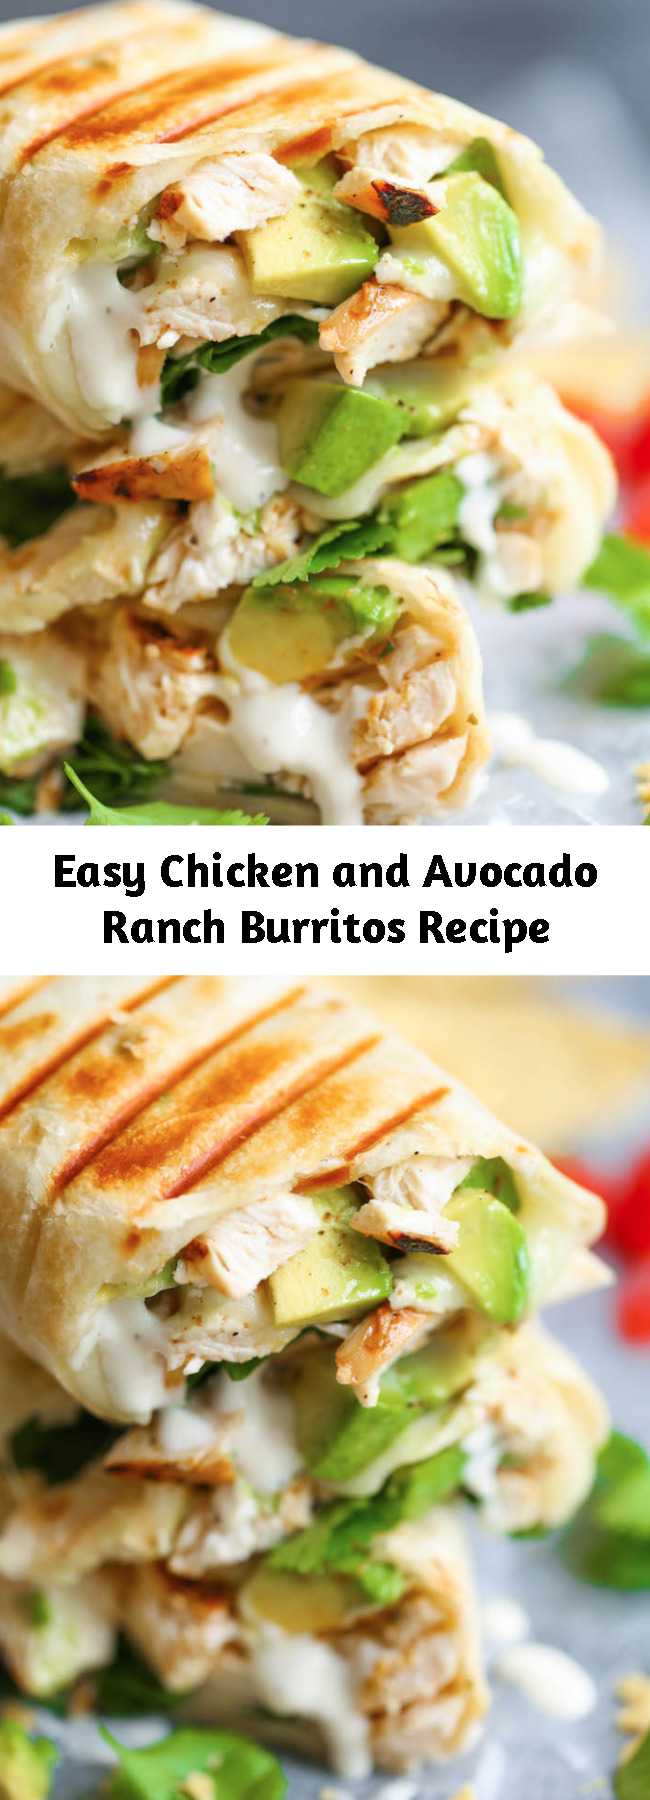 Easy Chicken and Avocado Ranch Burritos Recipe - These come together with just 15 min prep! You can also make this ahead of time and bake right before serving. SO EASY!